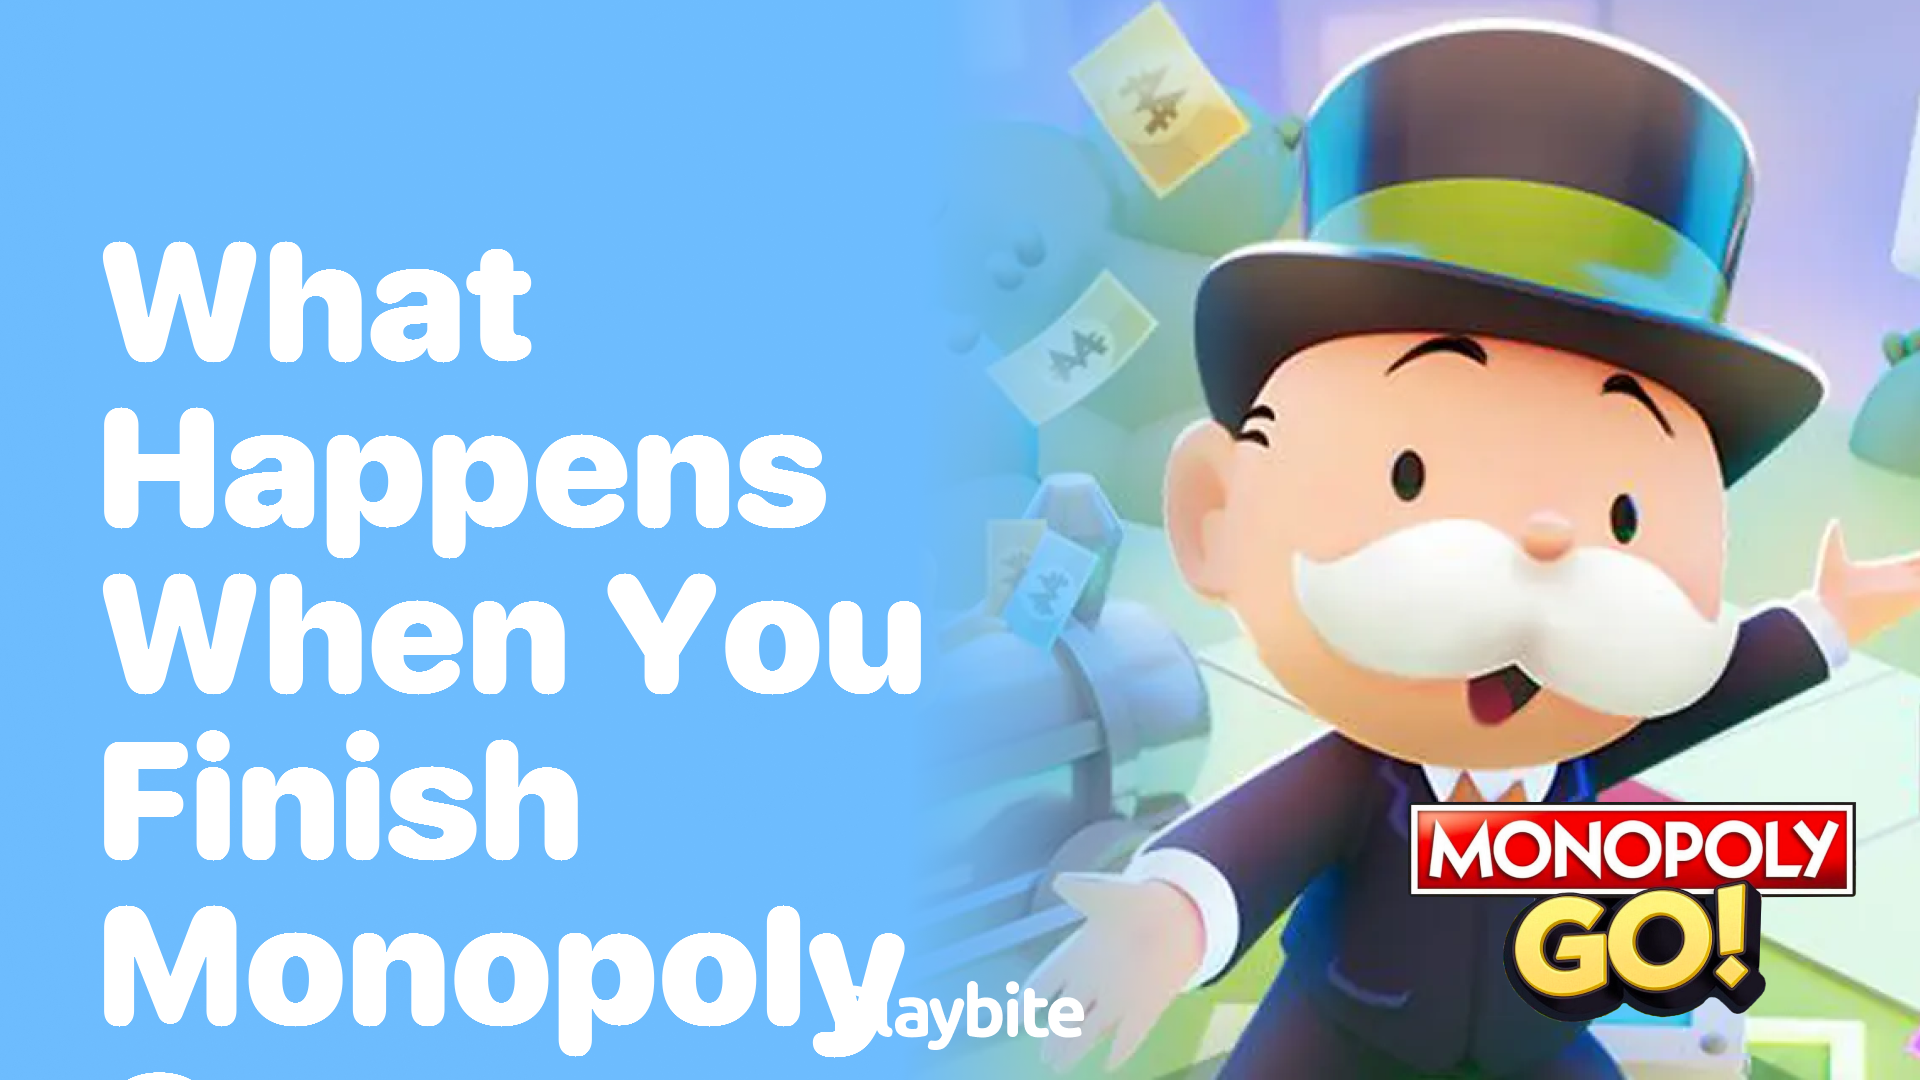 What Happens When You Finish Monopoly Go?